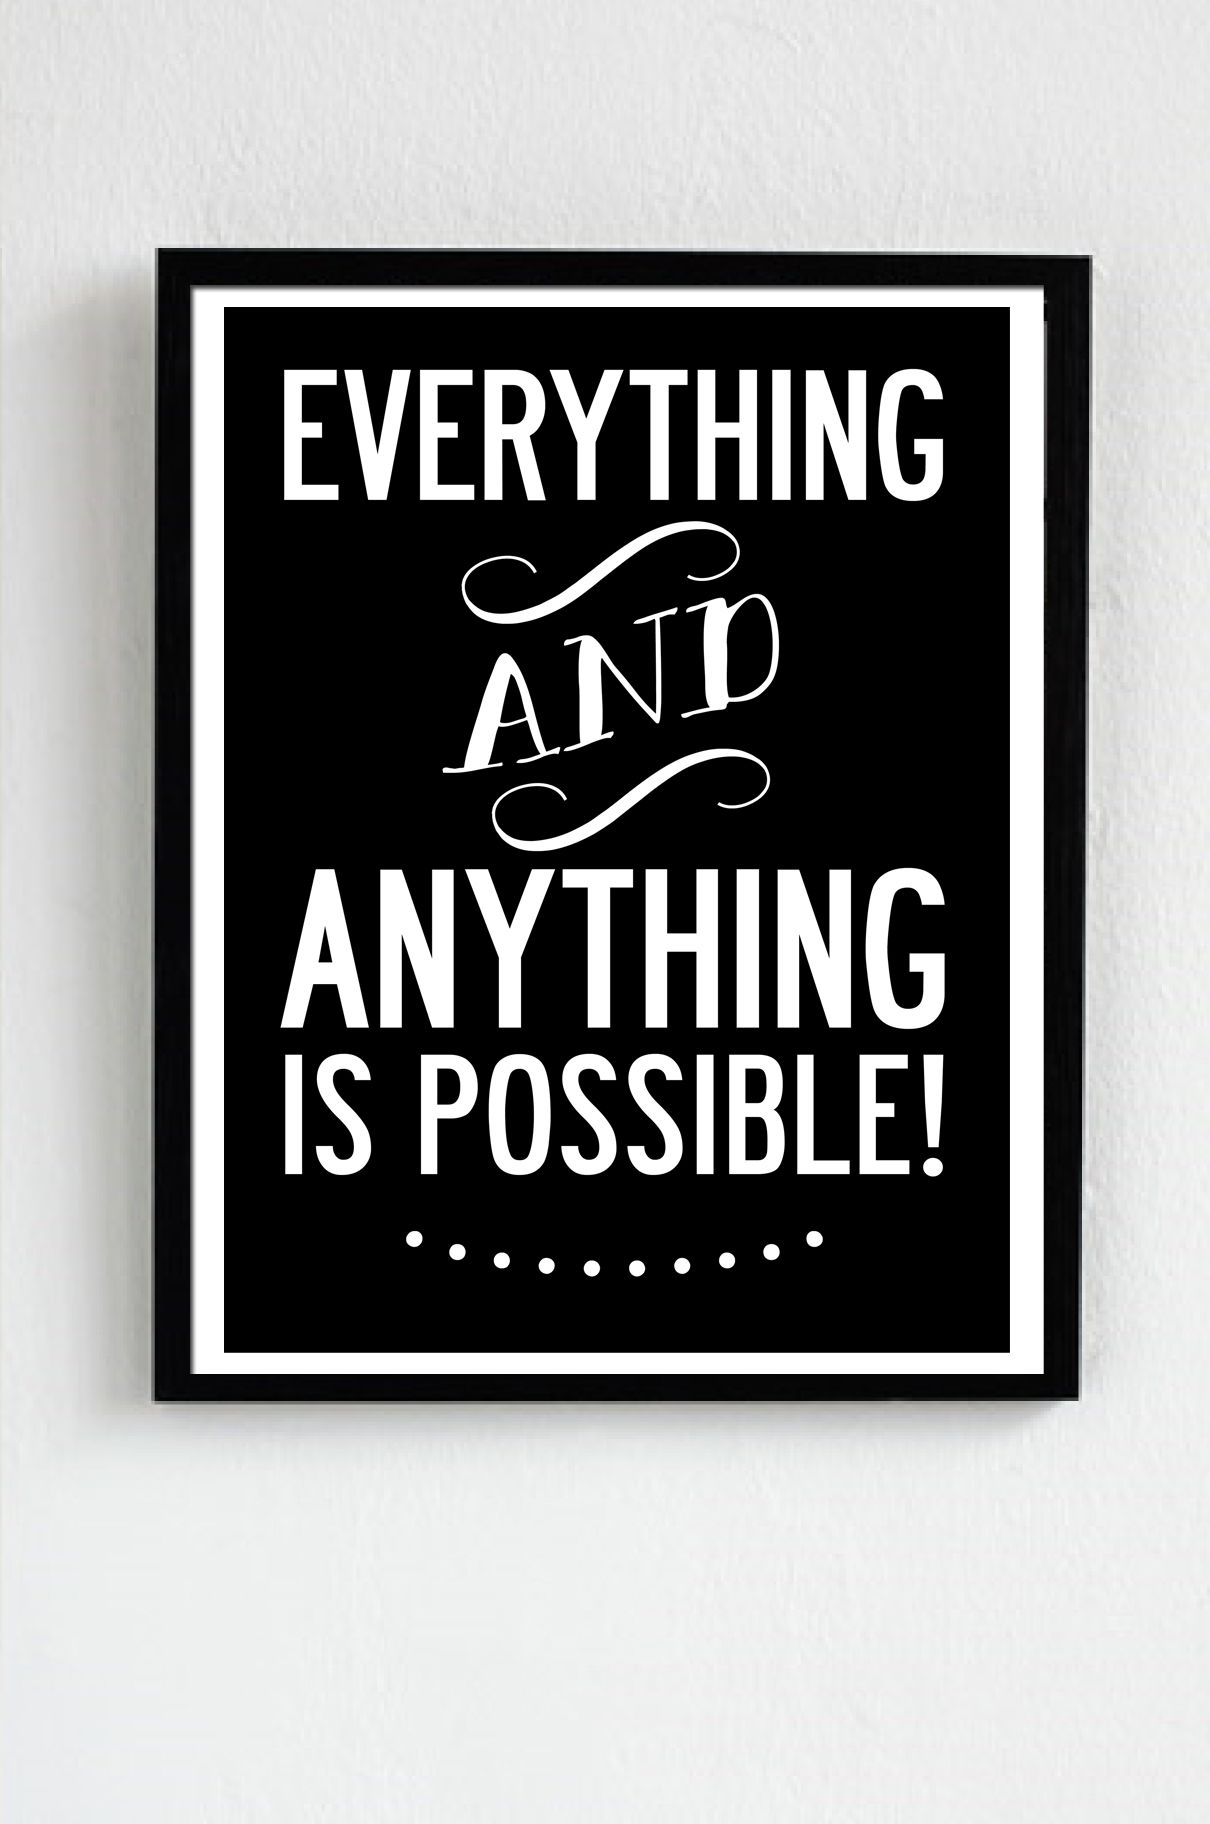 Anything is possible. Everything possible. Everything anything. Everything is possible игра.